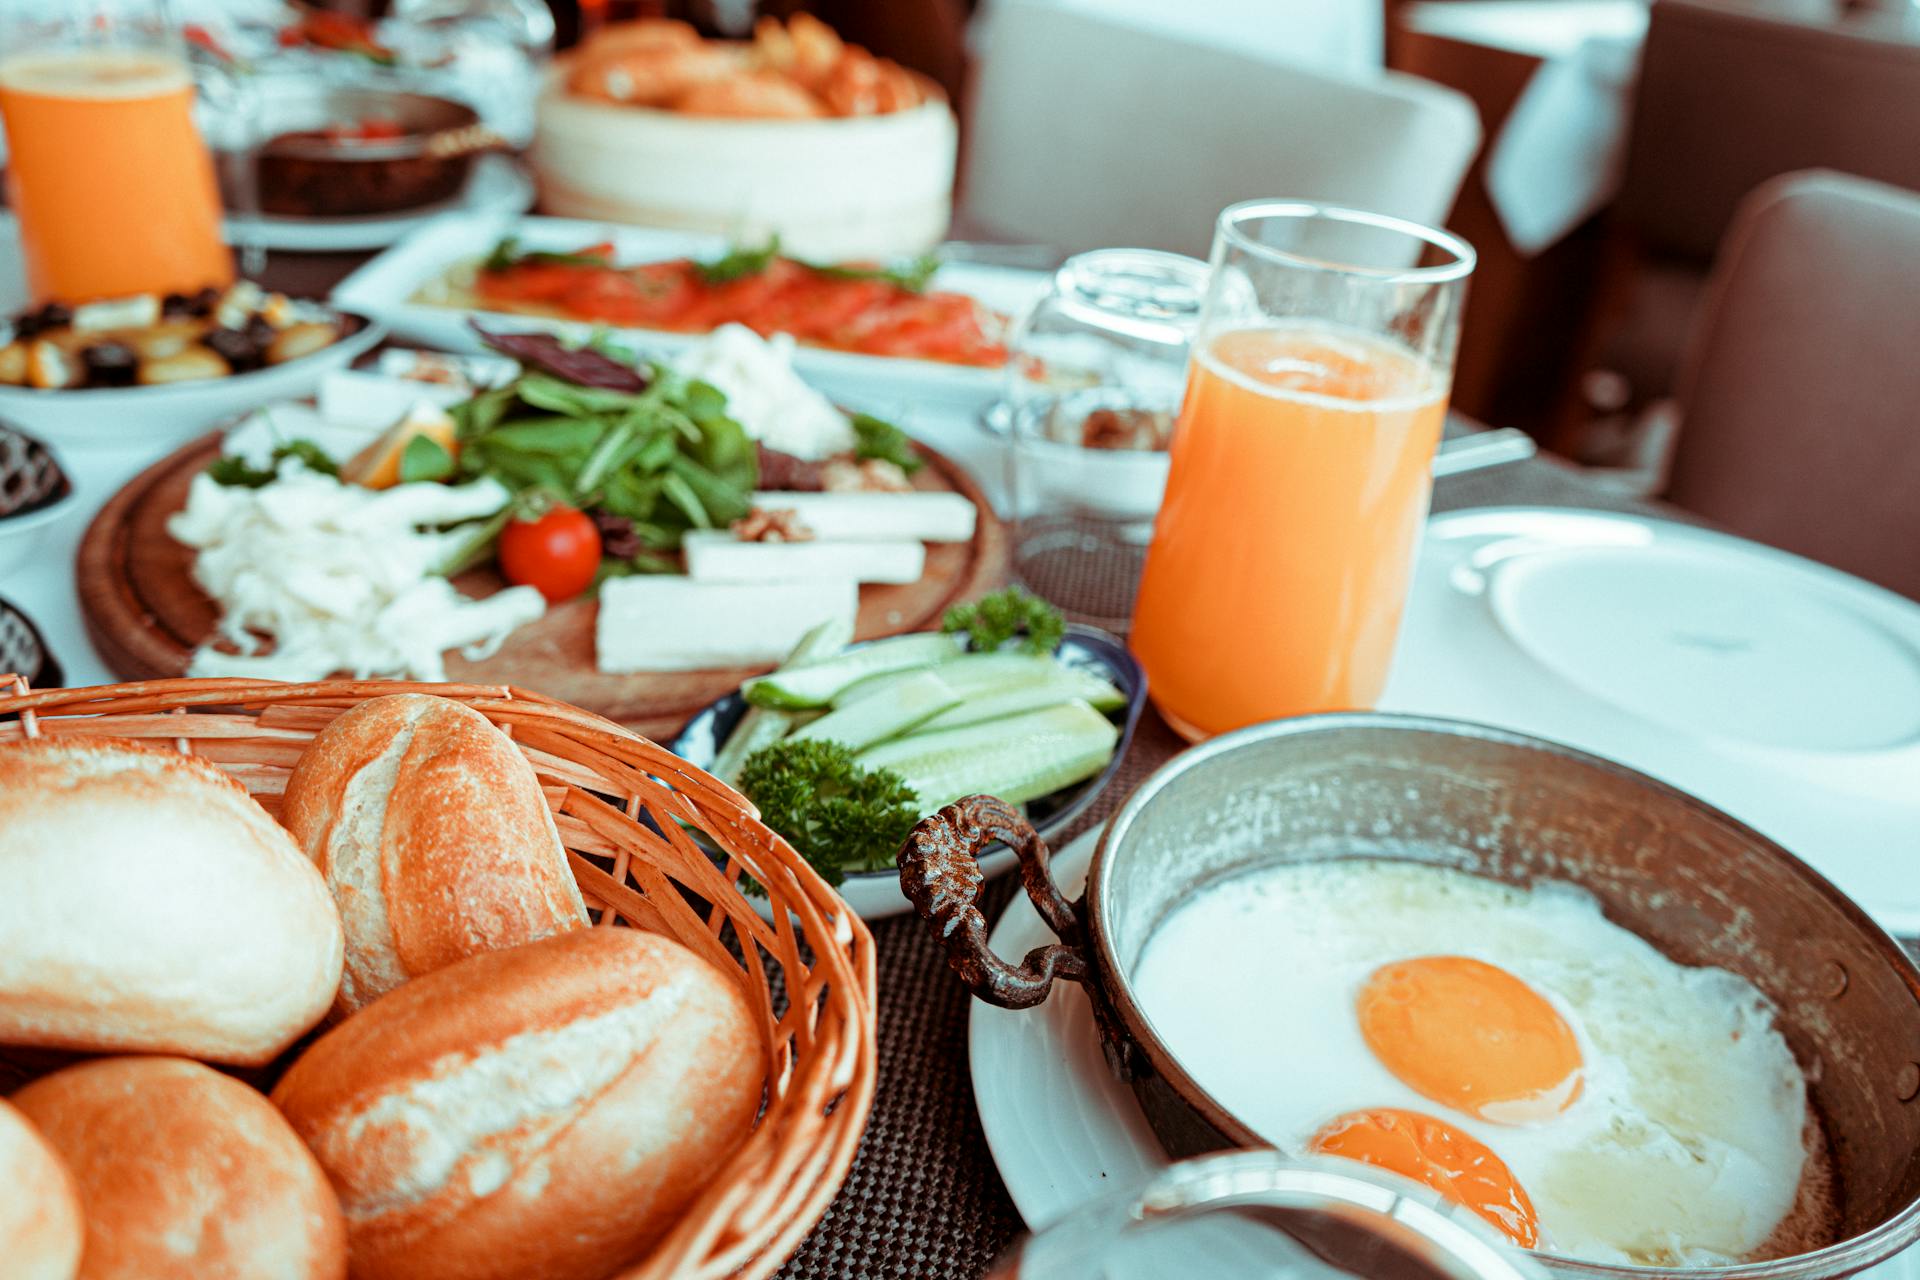 Breakfast served on the table | Source: Pexels